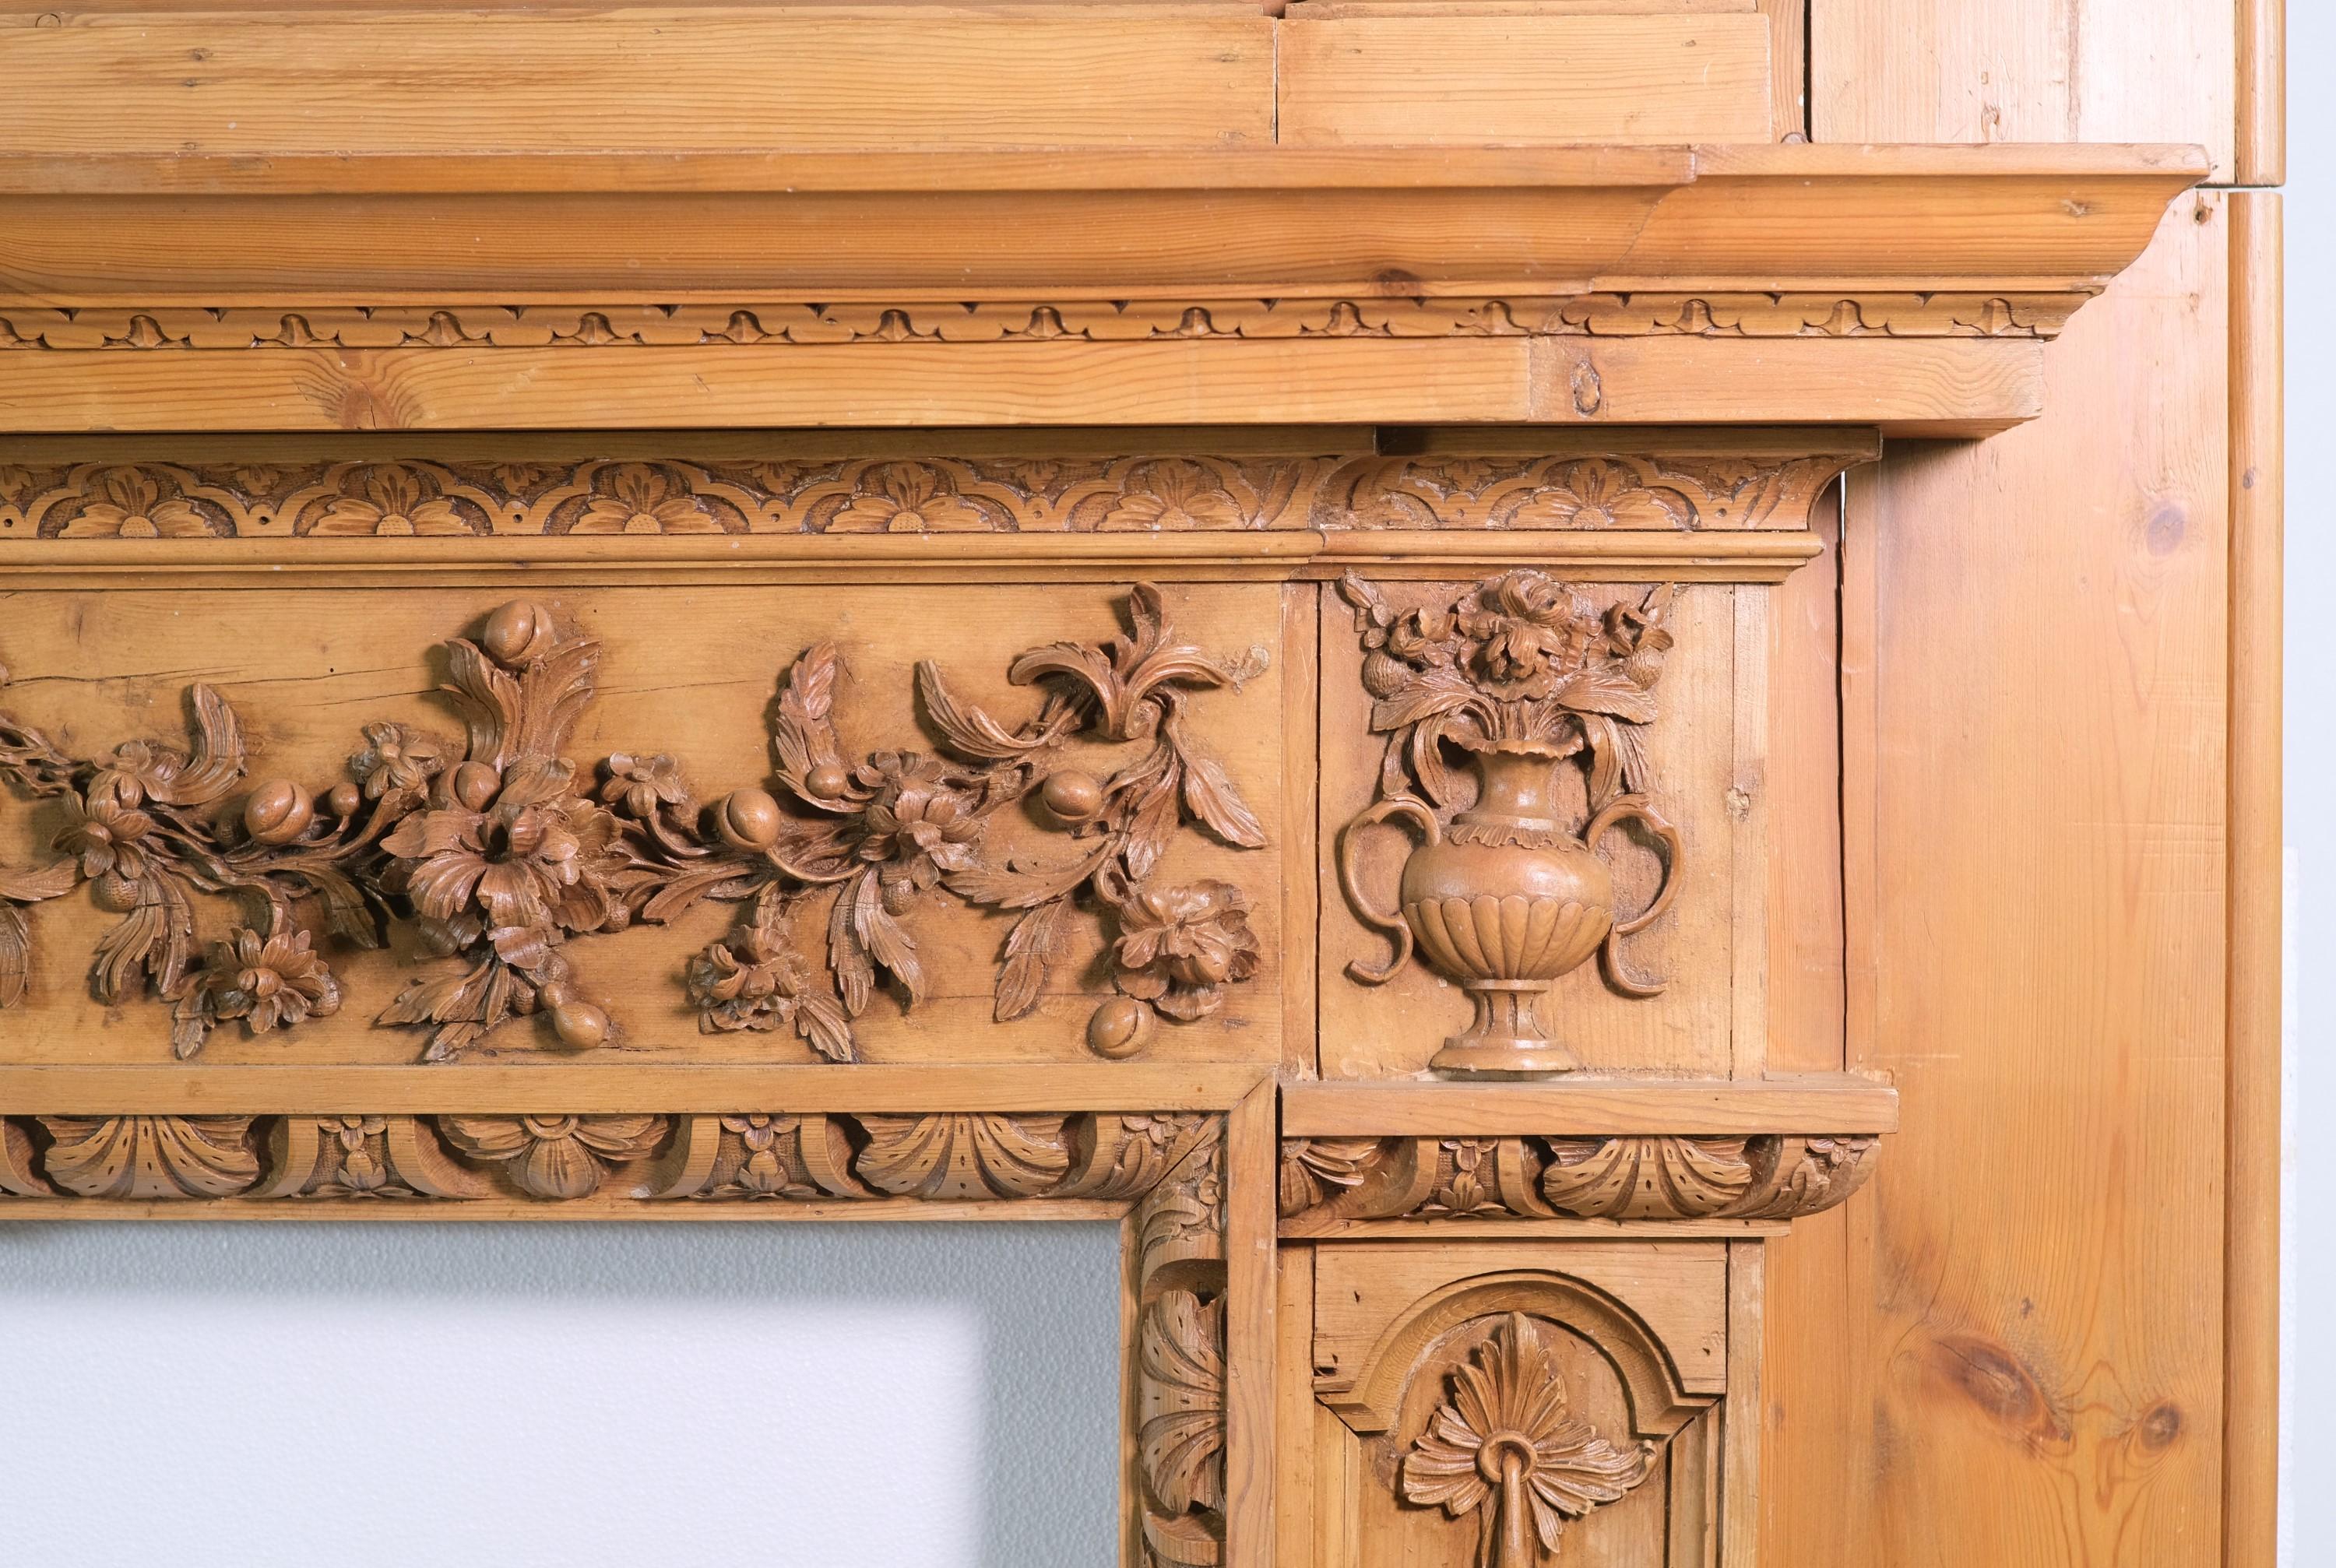 Rare vintage Rococo pine mantel with a natural finish and highly carved molding, and applied floral with urns throughout. There is some minor chipping and missing design elements. There is a carved out hole in the center panel. Please see the